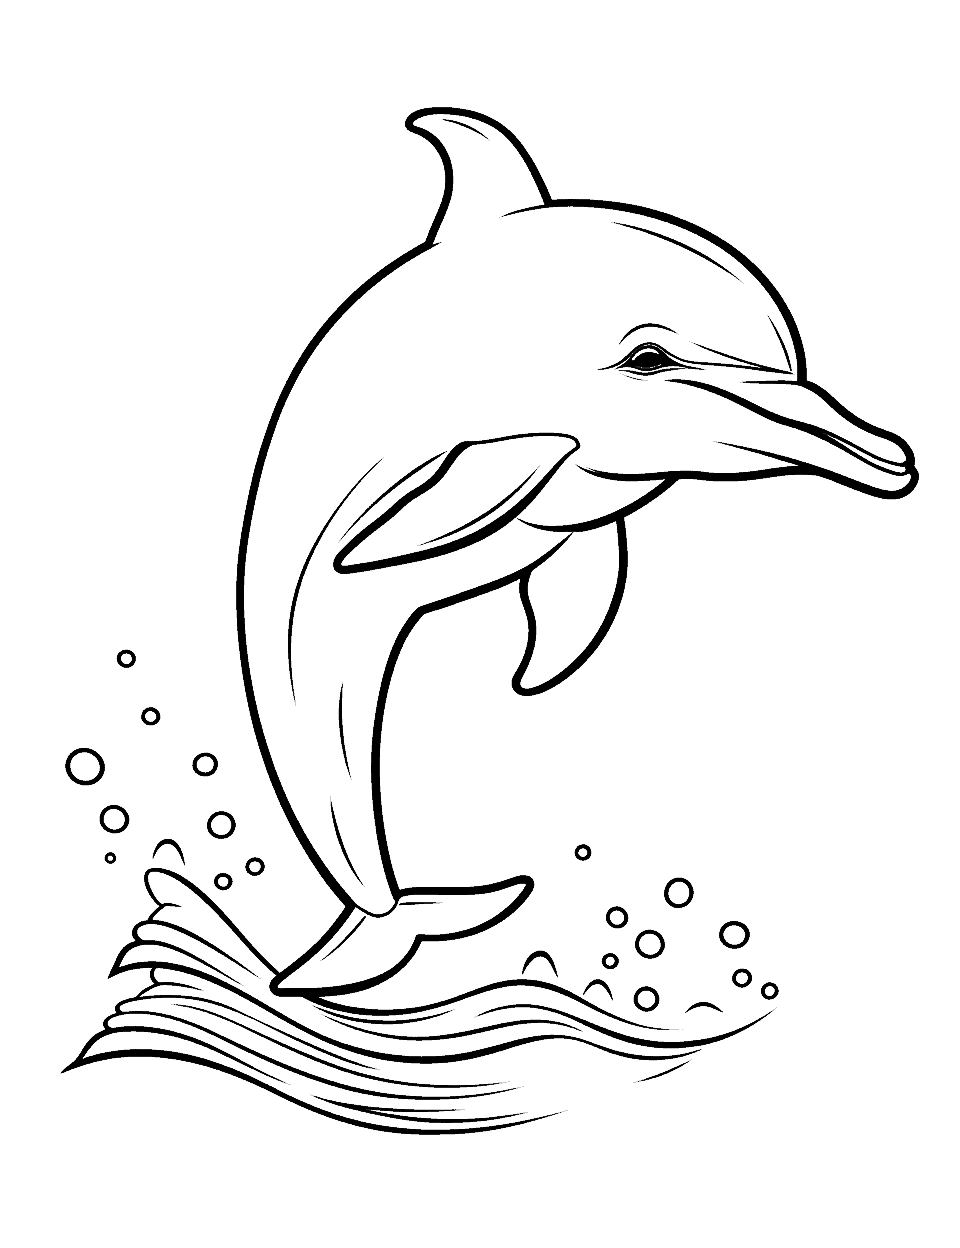 Splashing Dolphin Animal Coloring Page - A dolphin jumping out of the water and creating a splash.